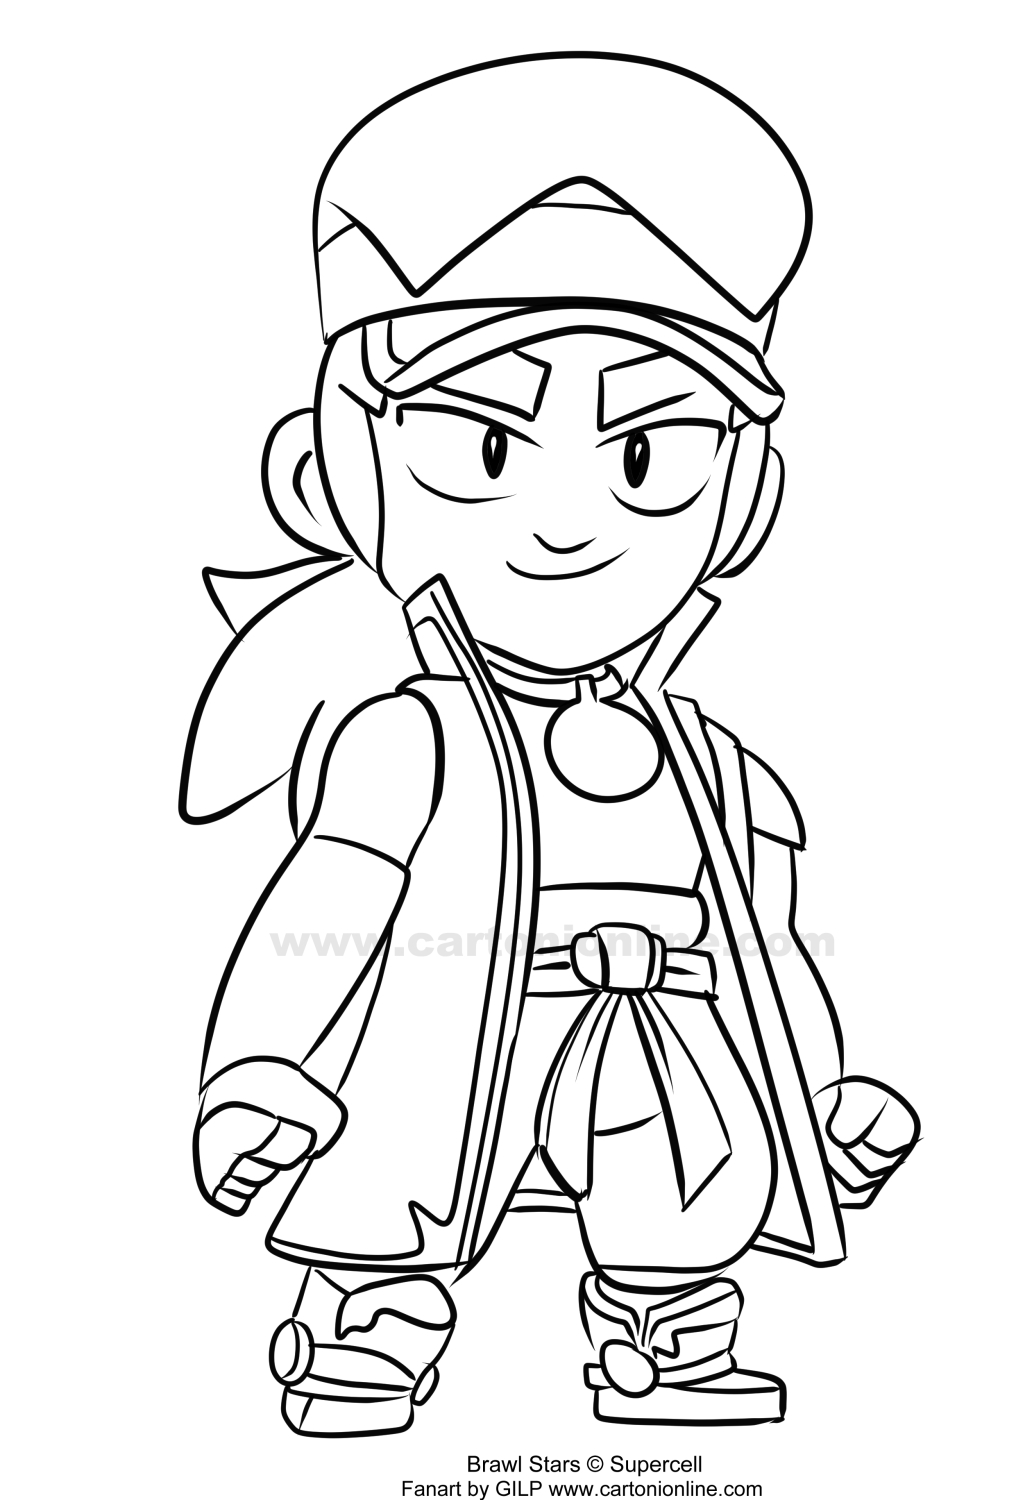 Fang 02 from Brawl Stars coloring page to print and coloring